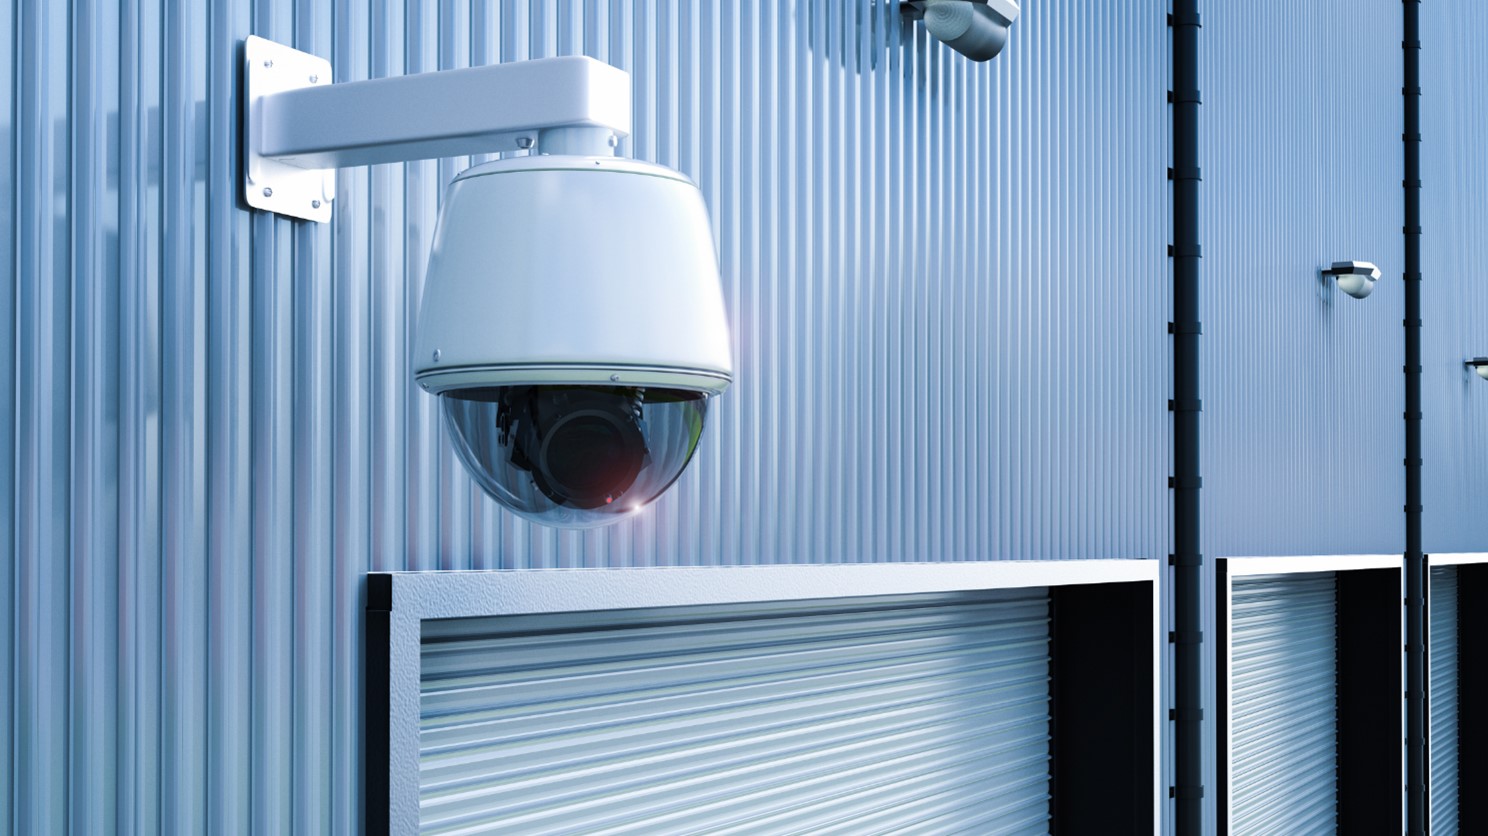 Warehouse Security Systems in Kansas City